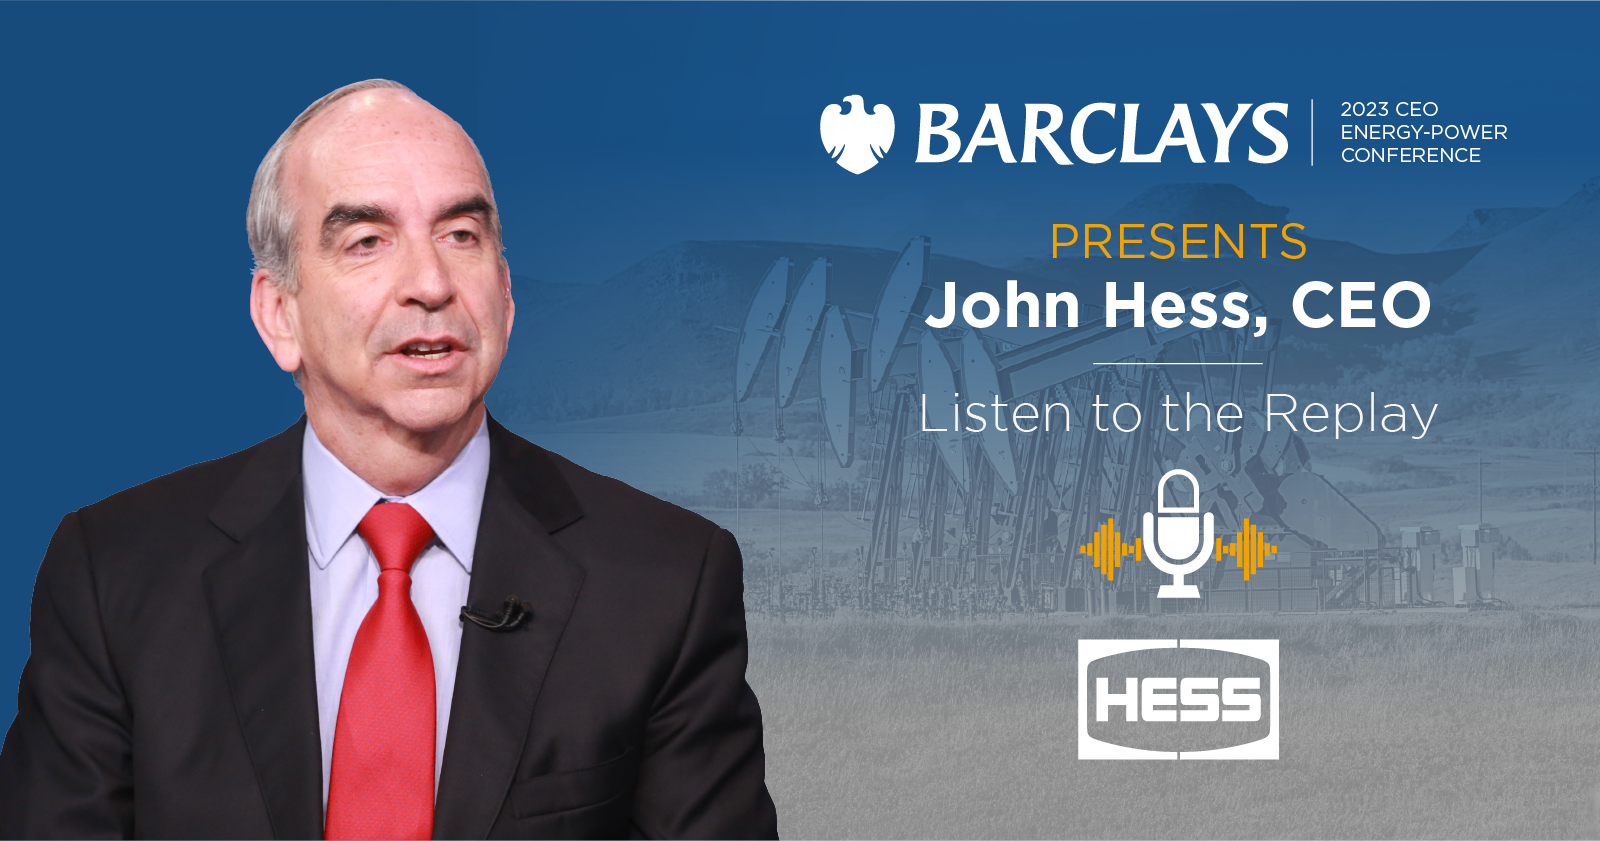 Hess Participates in the 2023 Barclays CEO Energy-Power Conference